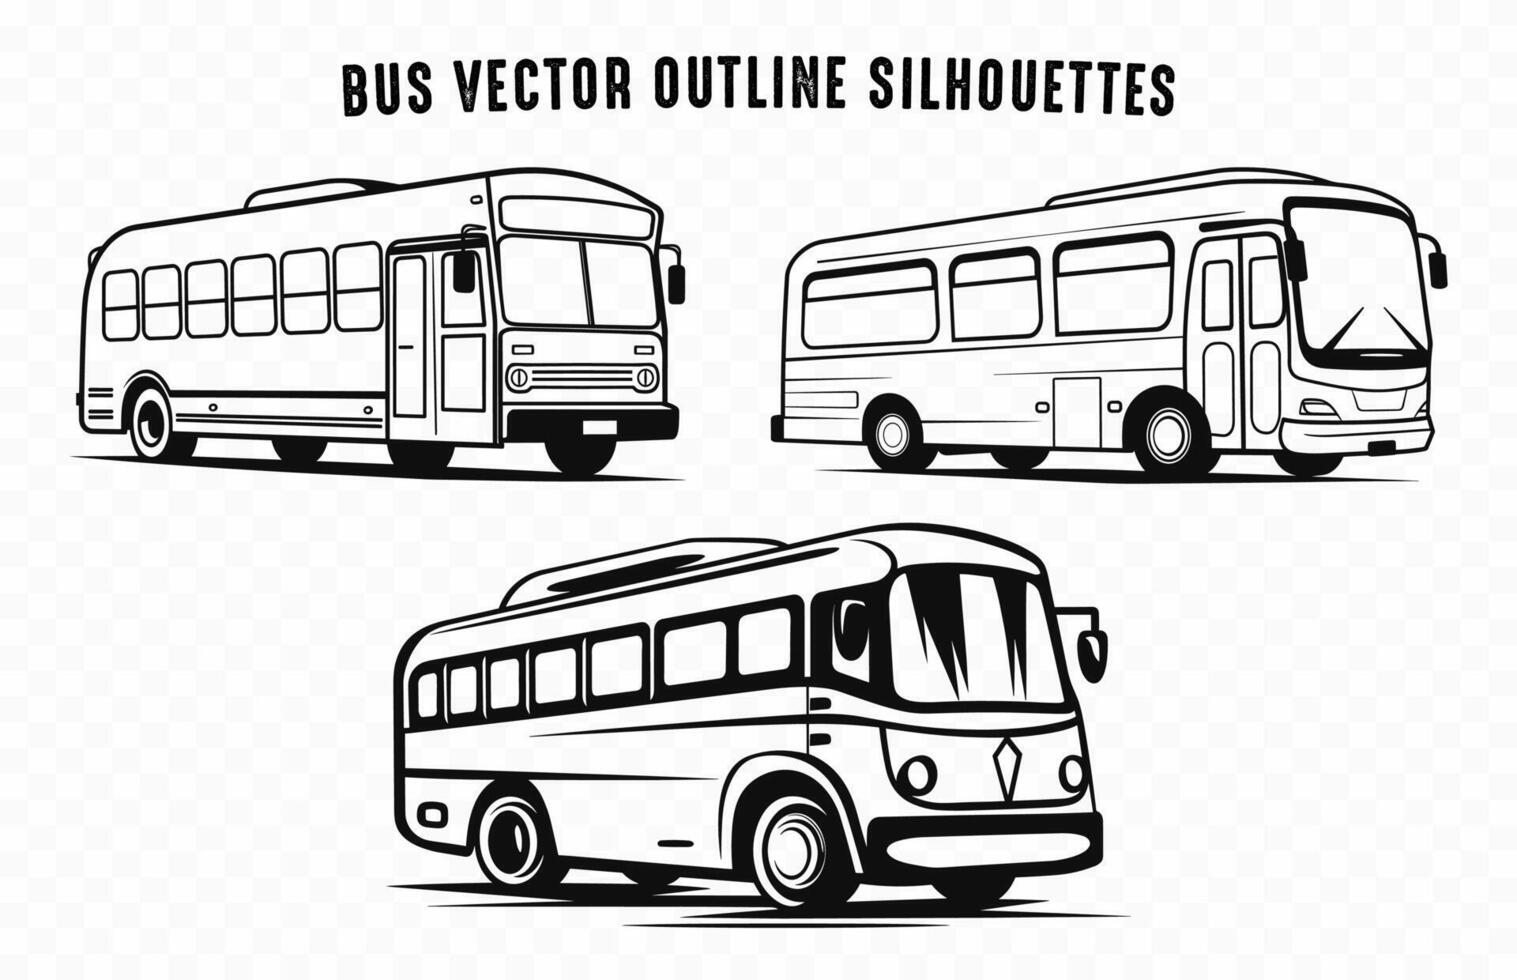 Bus Silhouette outline vector Set, Vehicles icon black silhouettes